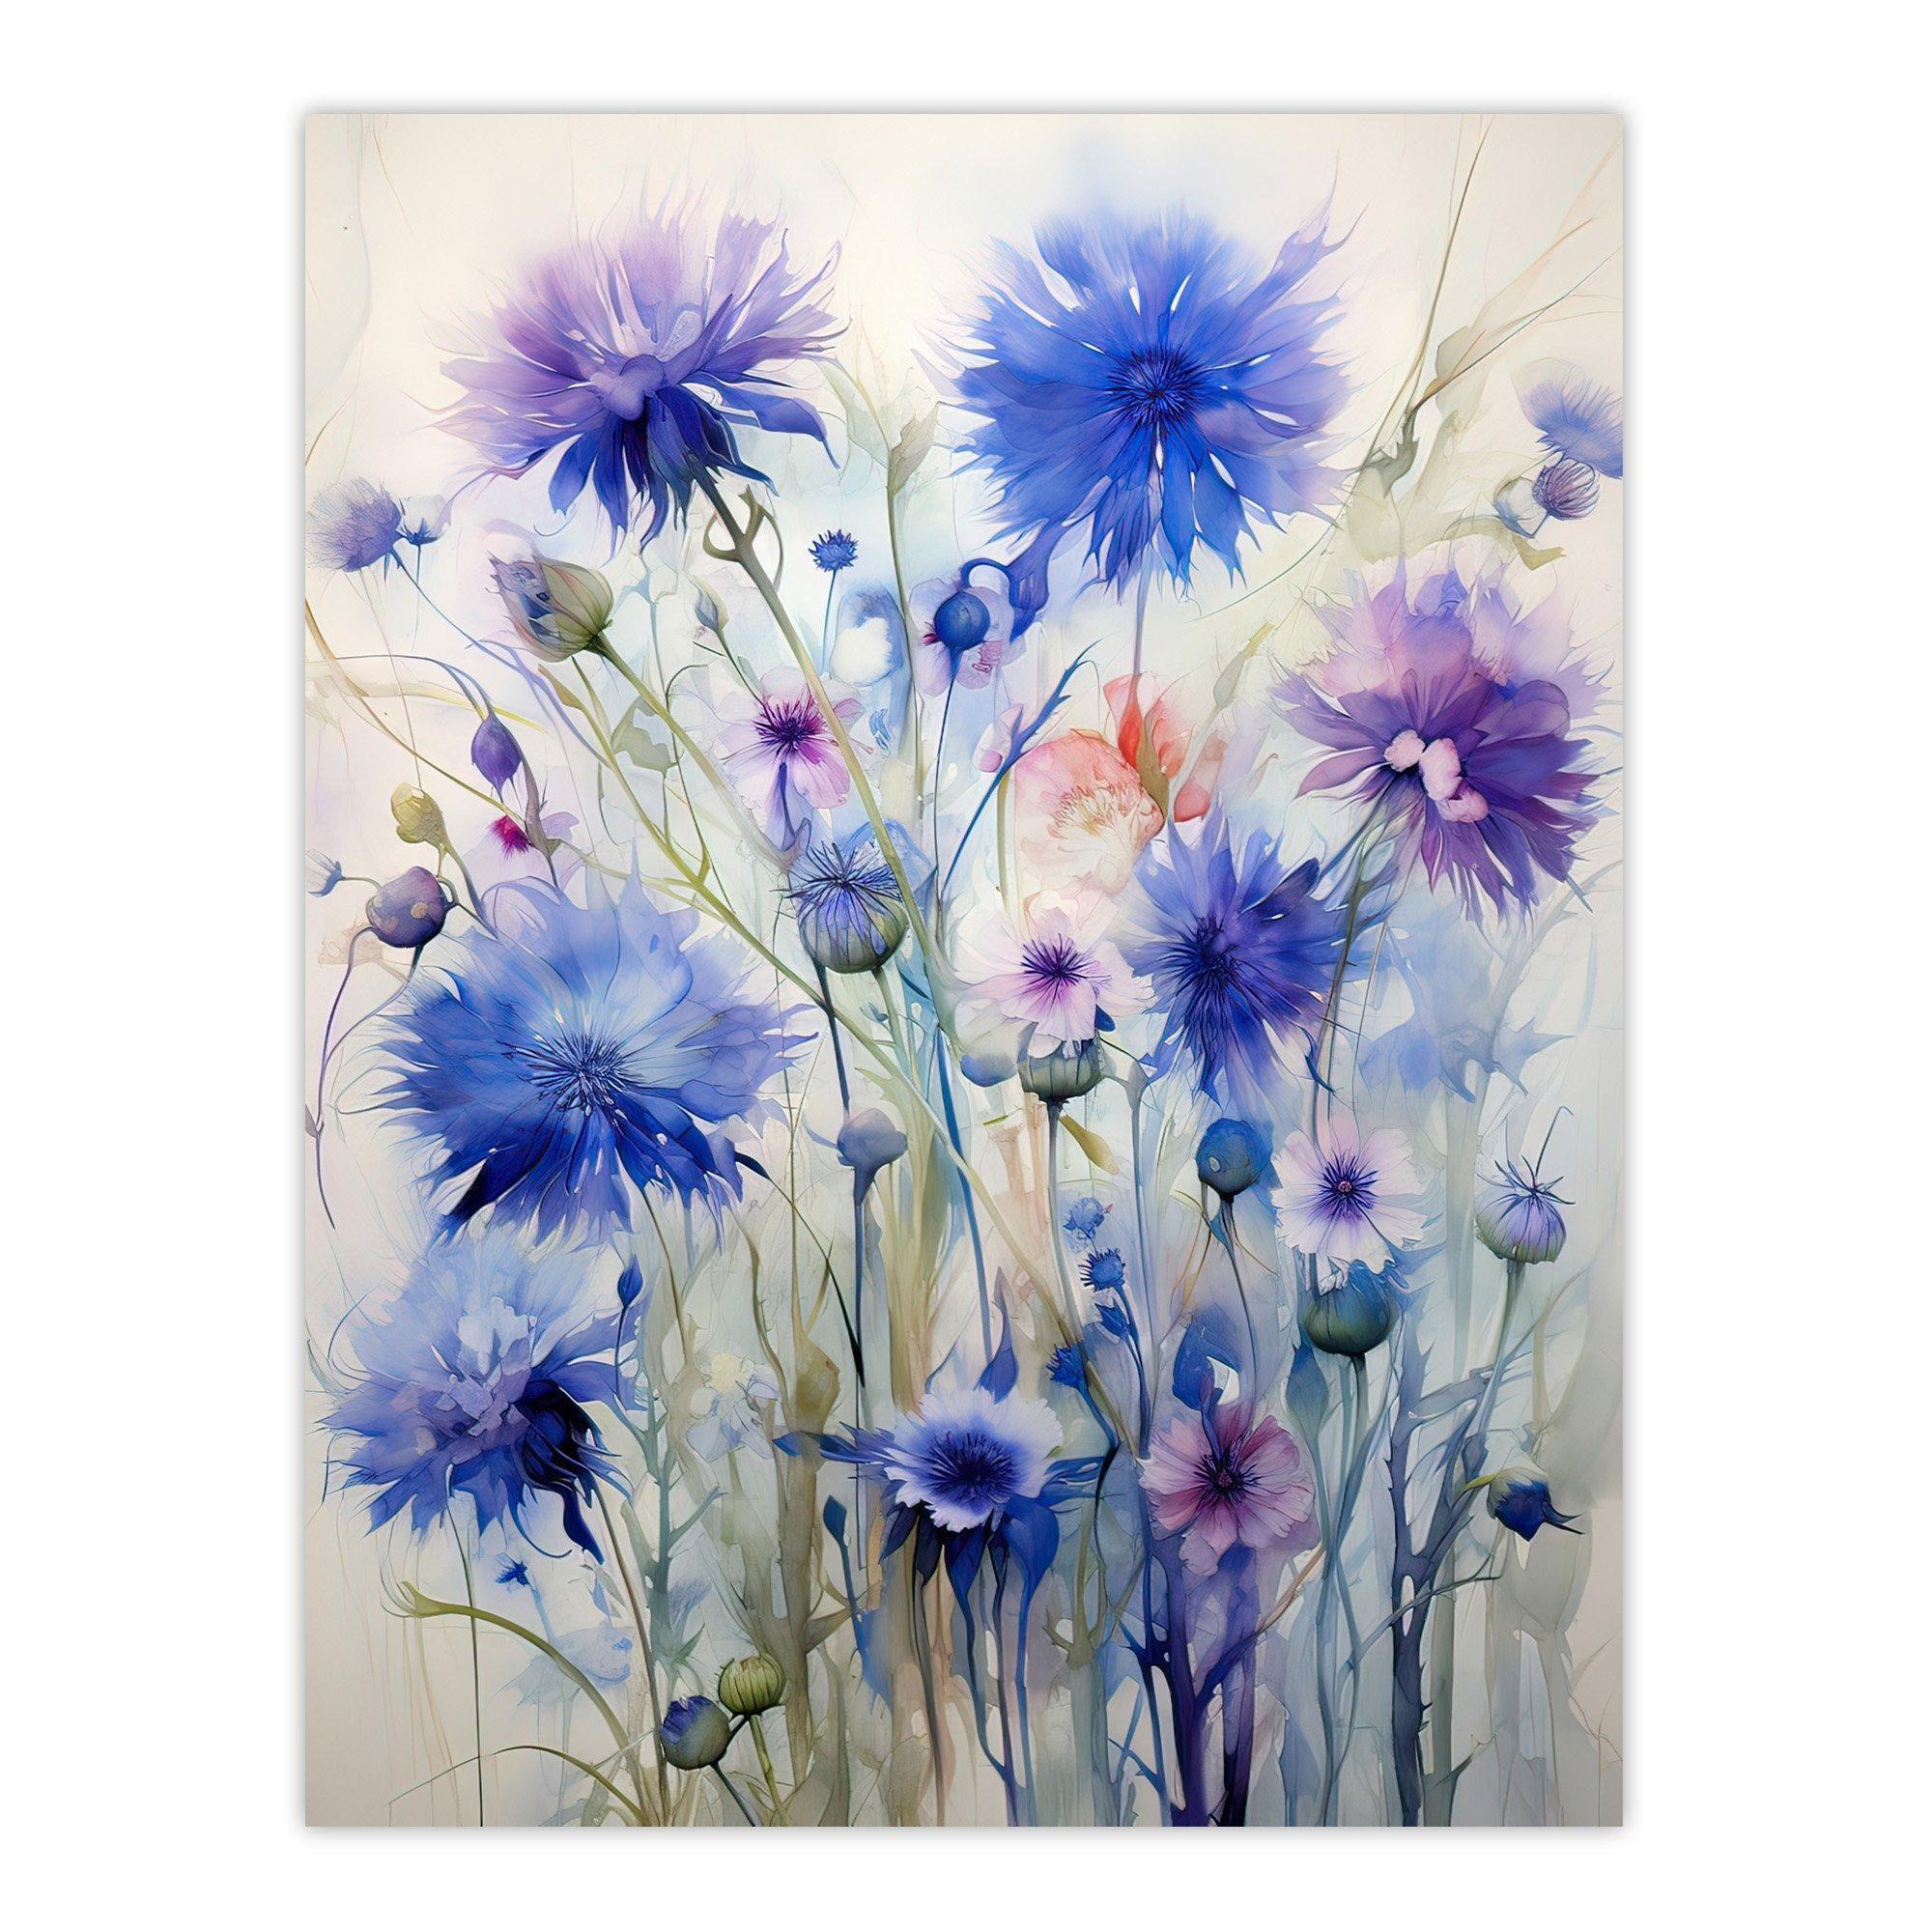 Cornflower Wildflower Meadow Watercolour Painting Wall Art Poster Print Picture - image 1